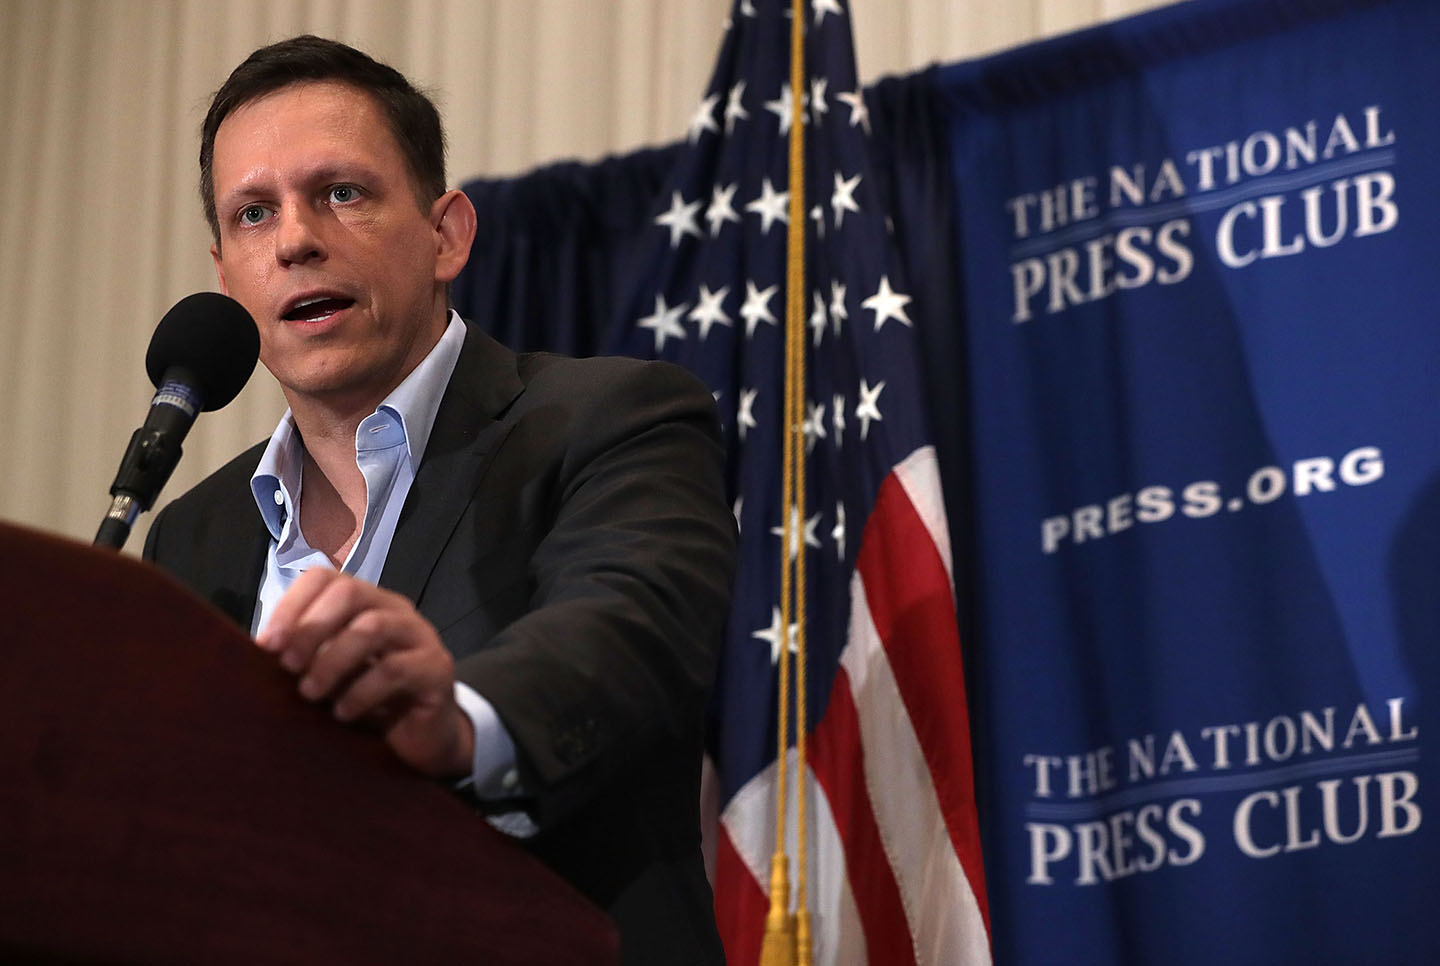 Entrepreneur Peter Thiel gives remarks at the National Press Club on October 31, 2016 in Washington, DC.